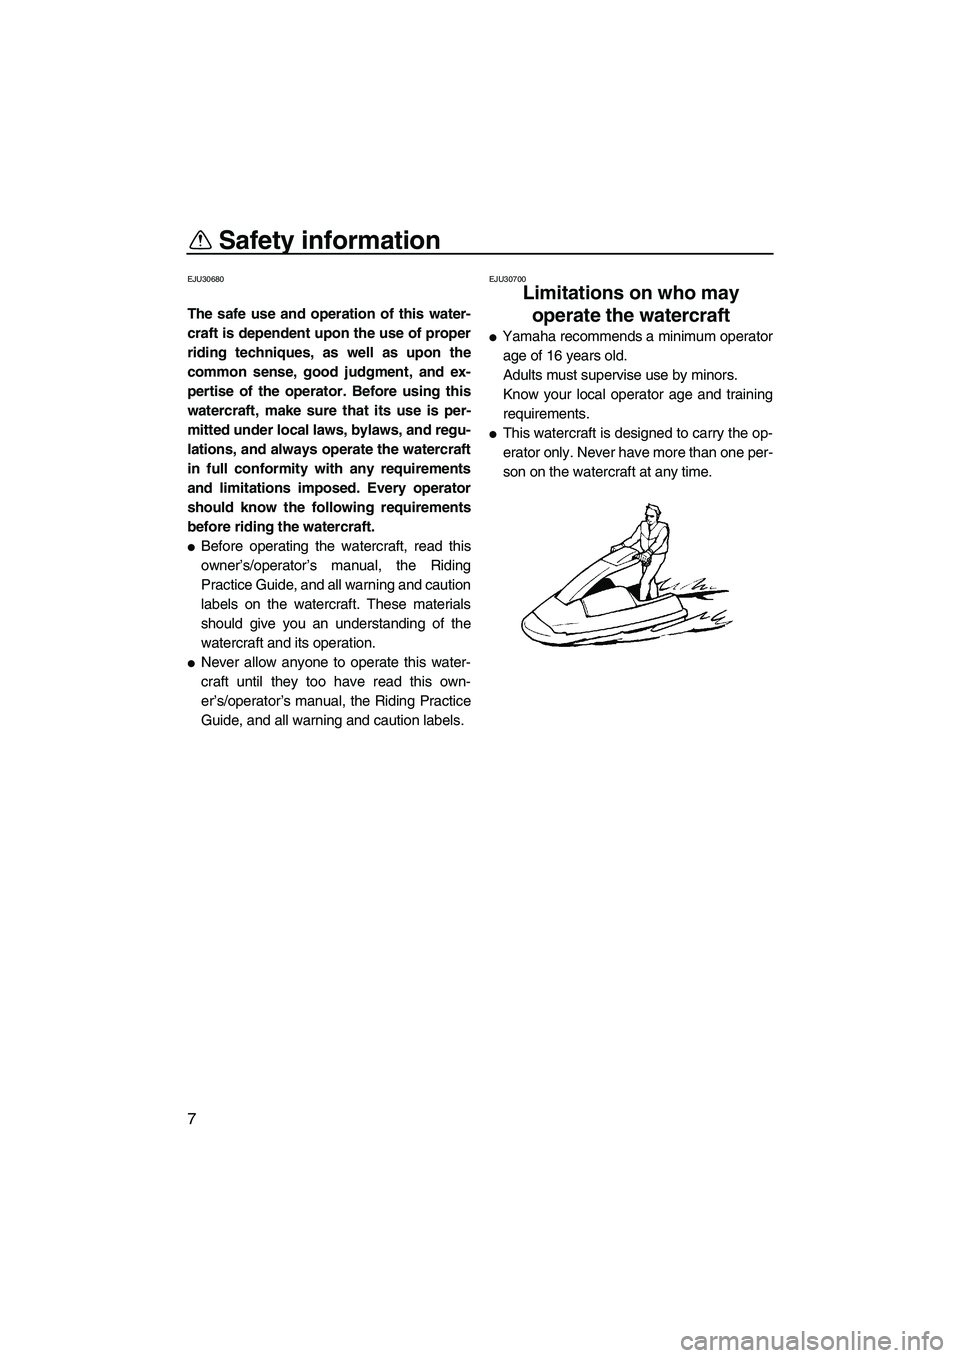 YAMAHA SUPERJET 2008 User Guide Safety information
7
EJU30680
The safe use and operation of this water-
craft is dependent upon the use of proper
riding techniques, as well as upon the
common sense, good judgment, and ex-
pertise of